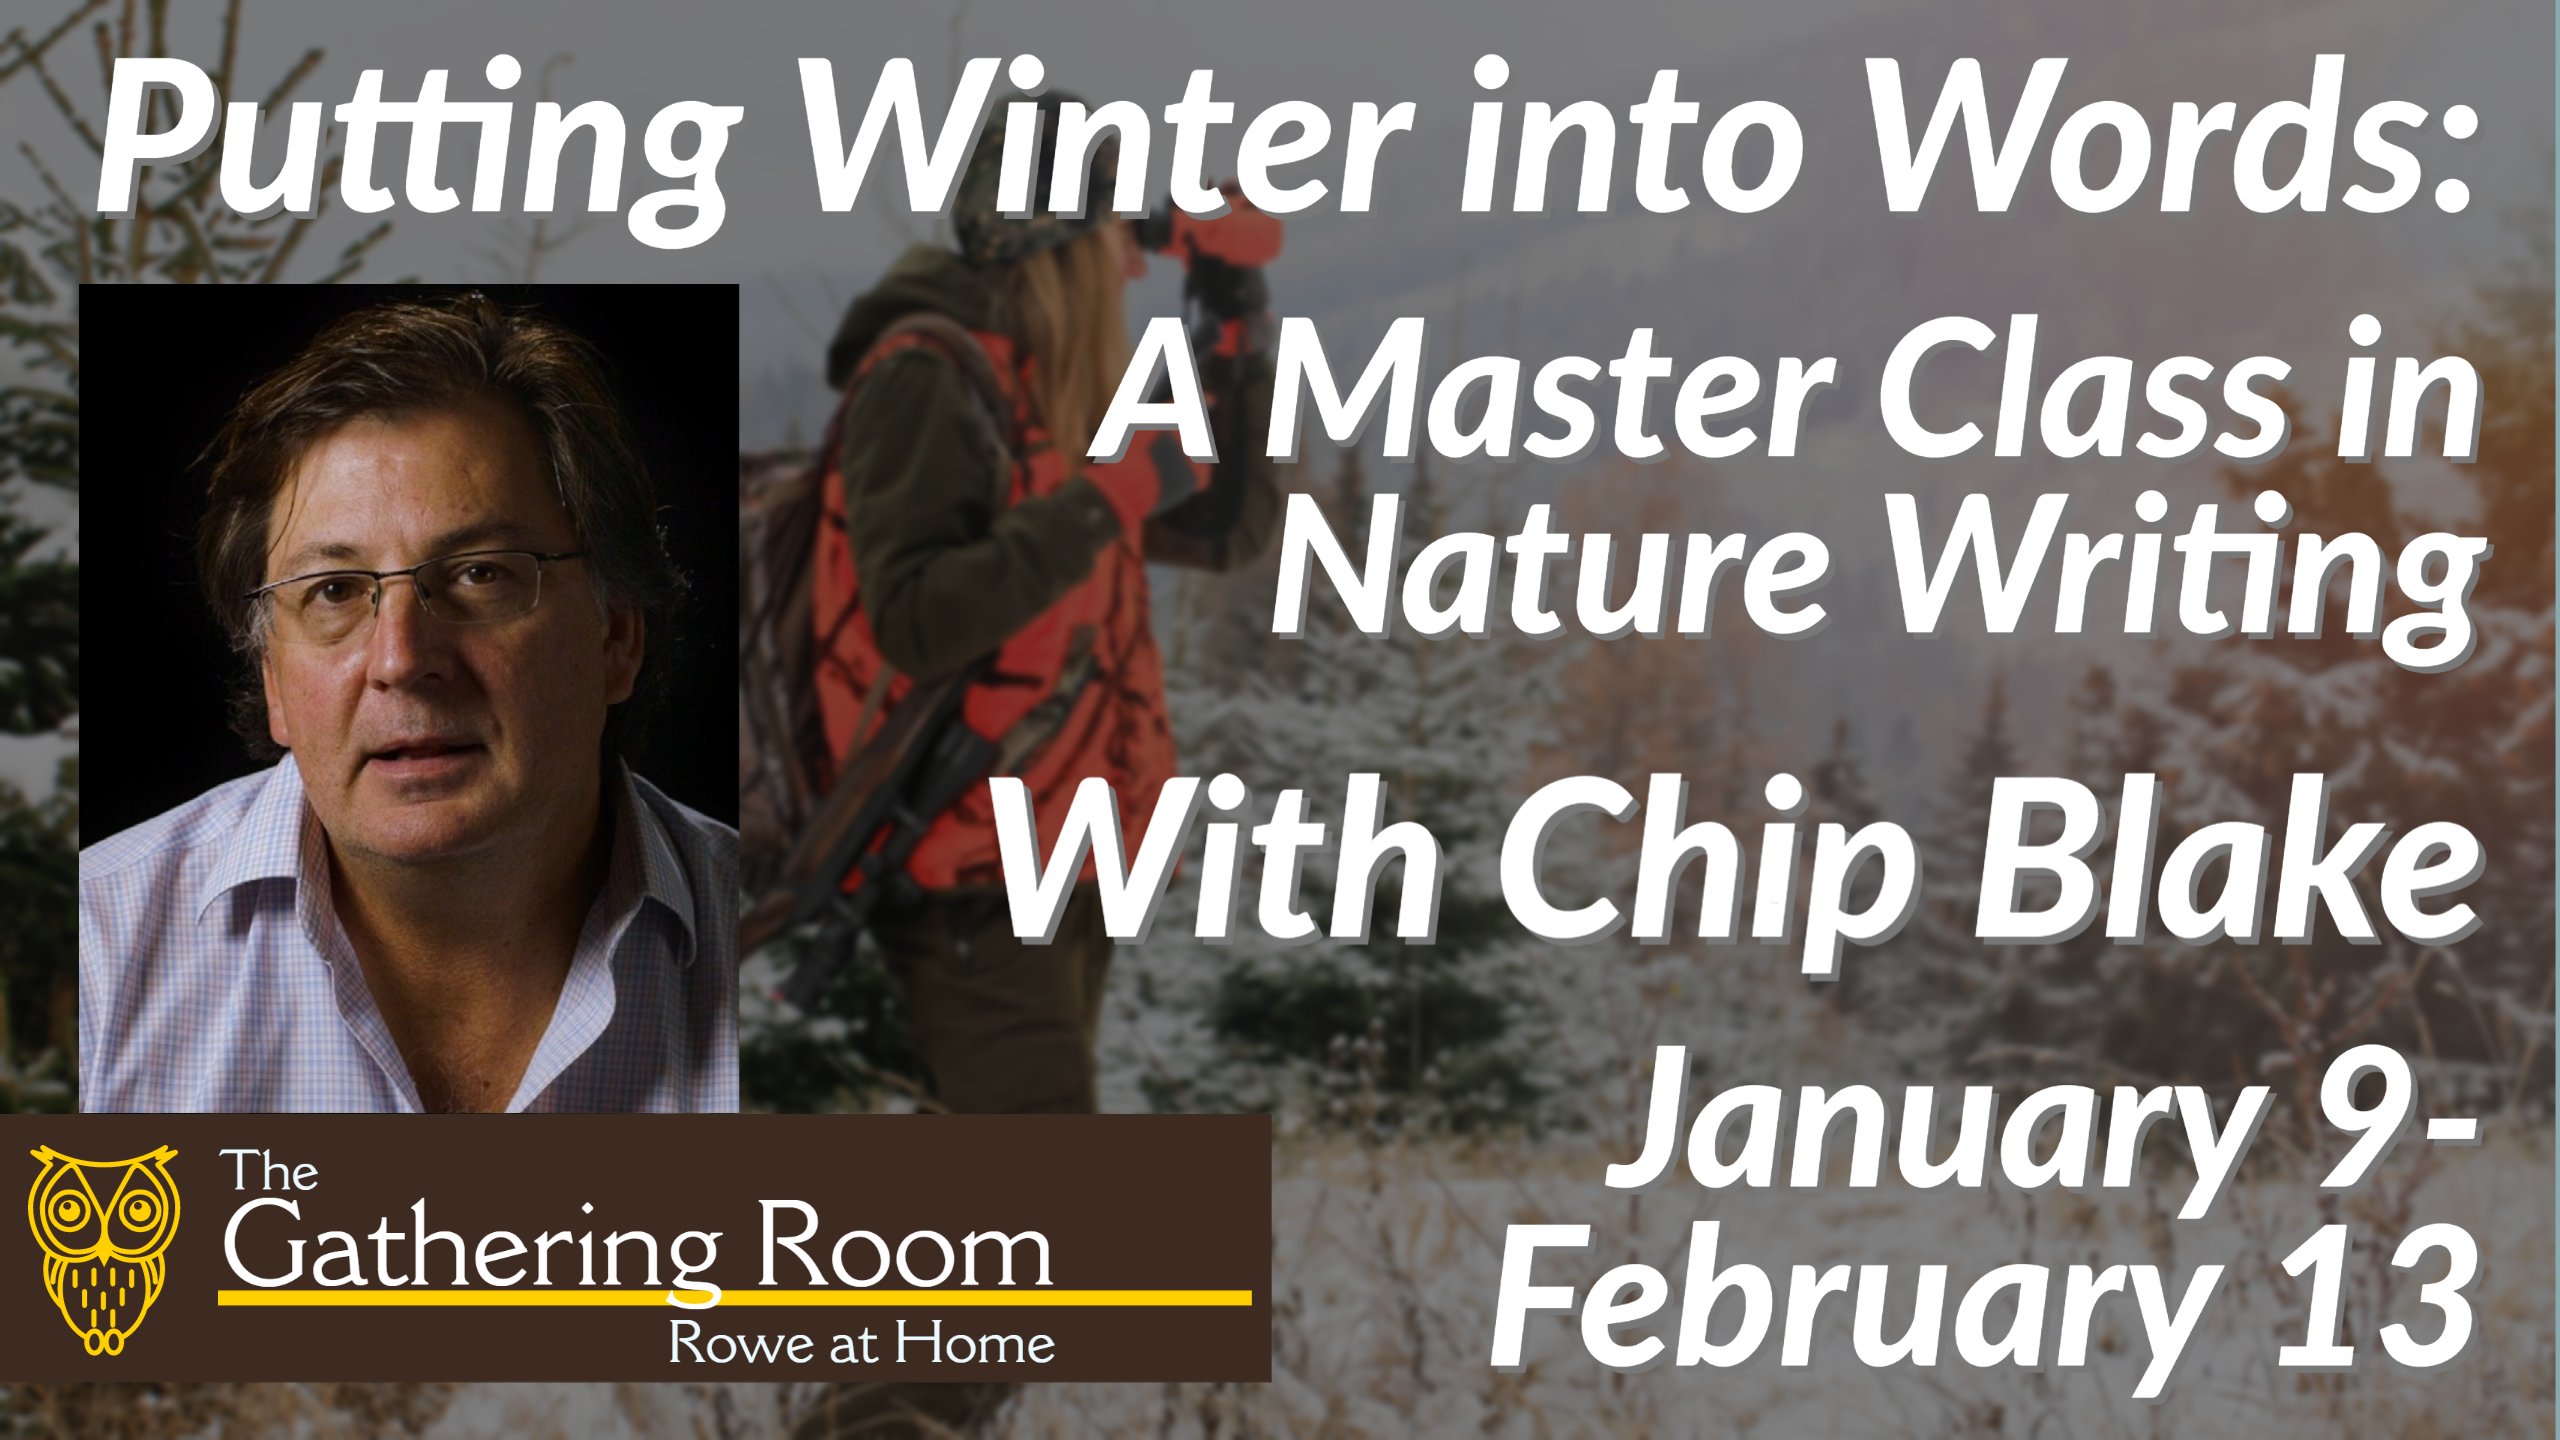 Putting Winter into Words: A Master Class in Nature Writing